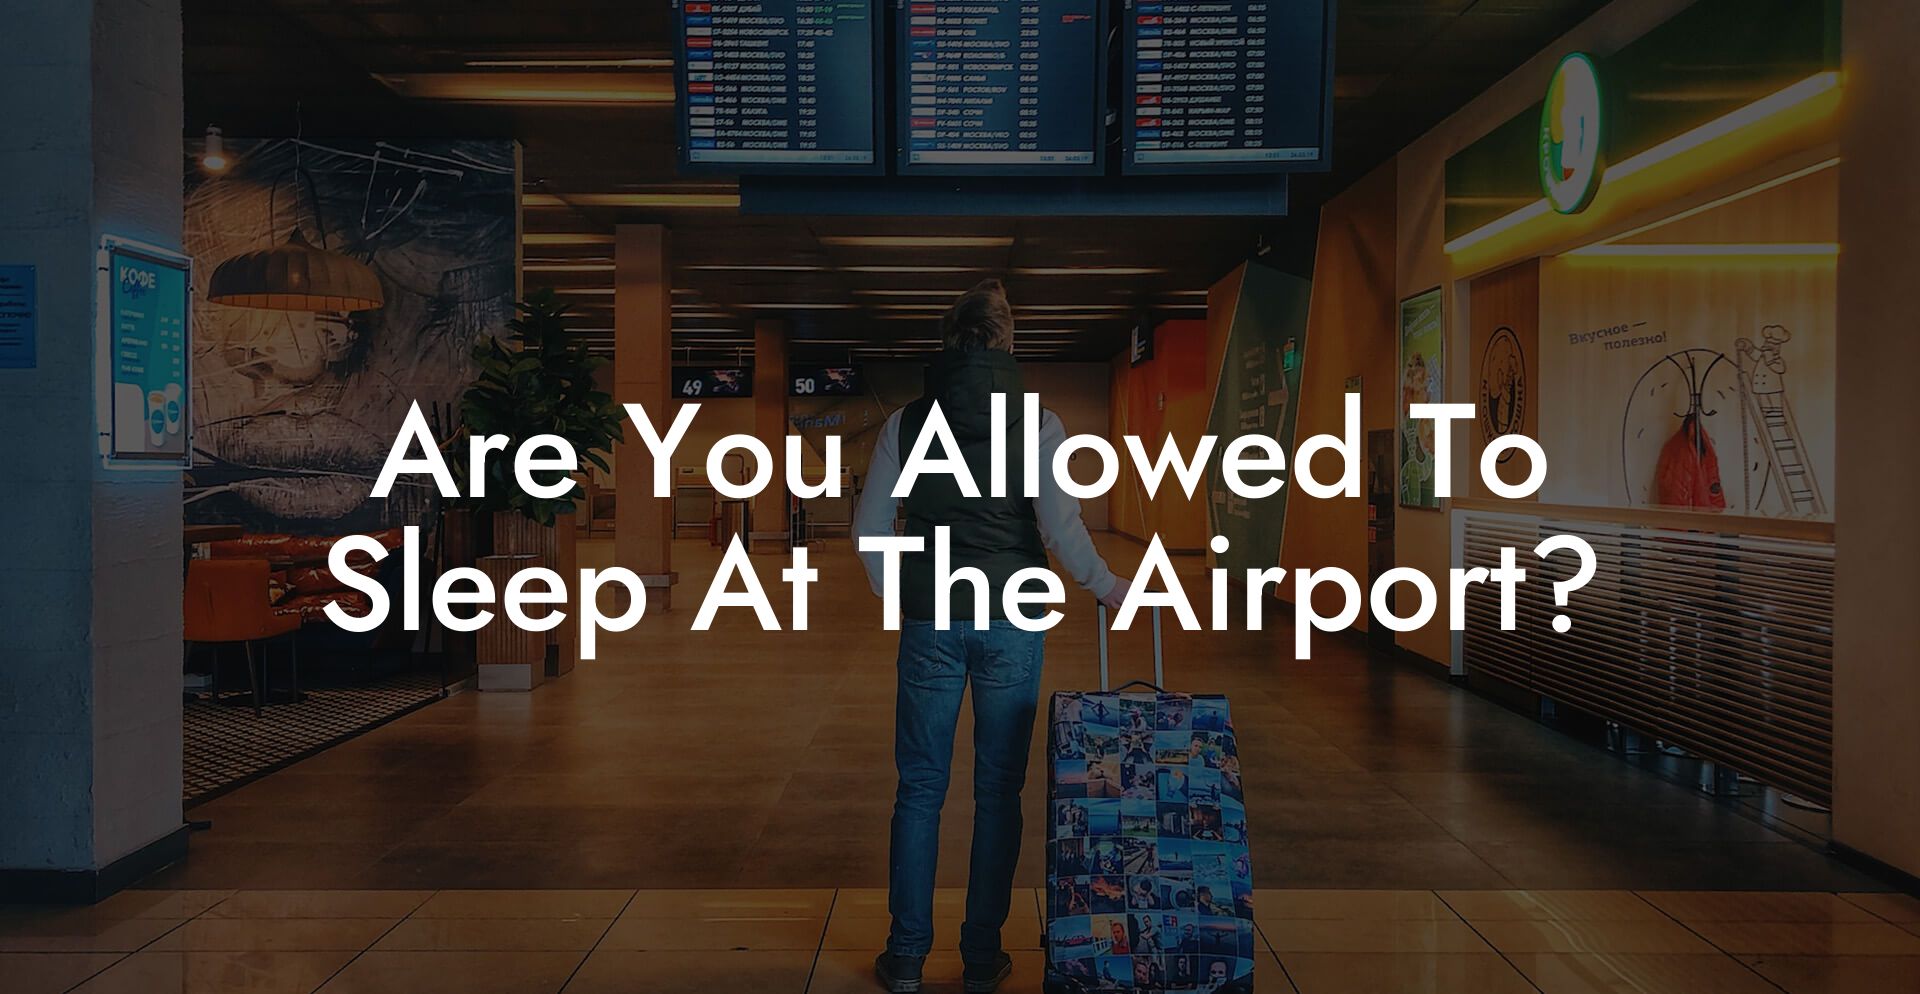 Are You Allowed To Sleep At The Airport?